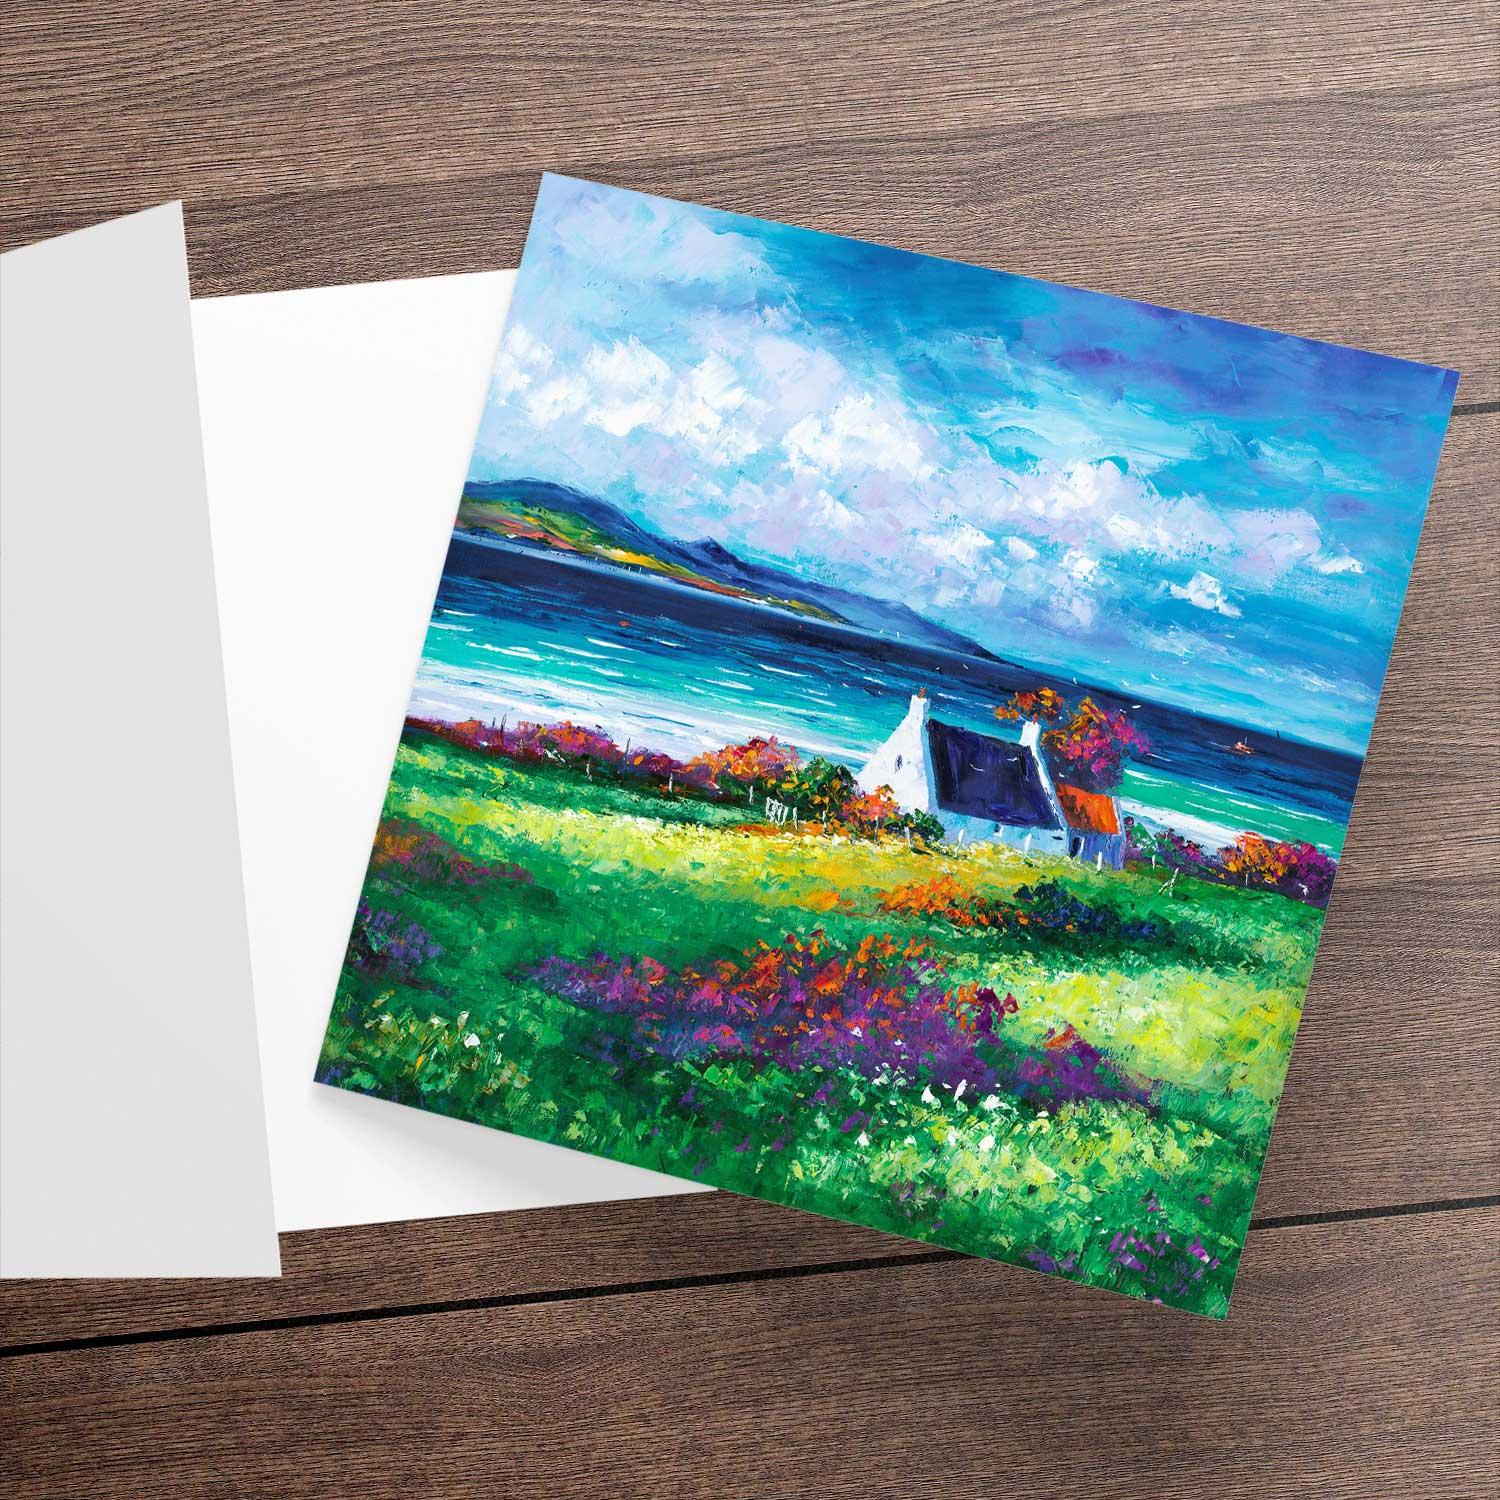 Bright and Breezy, Isle of Arran Greeting Card from an original painting by artist Jean Feeney